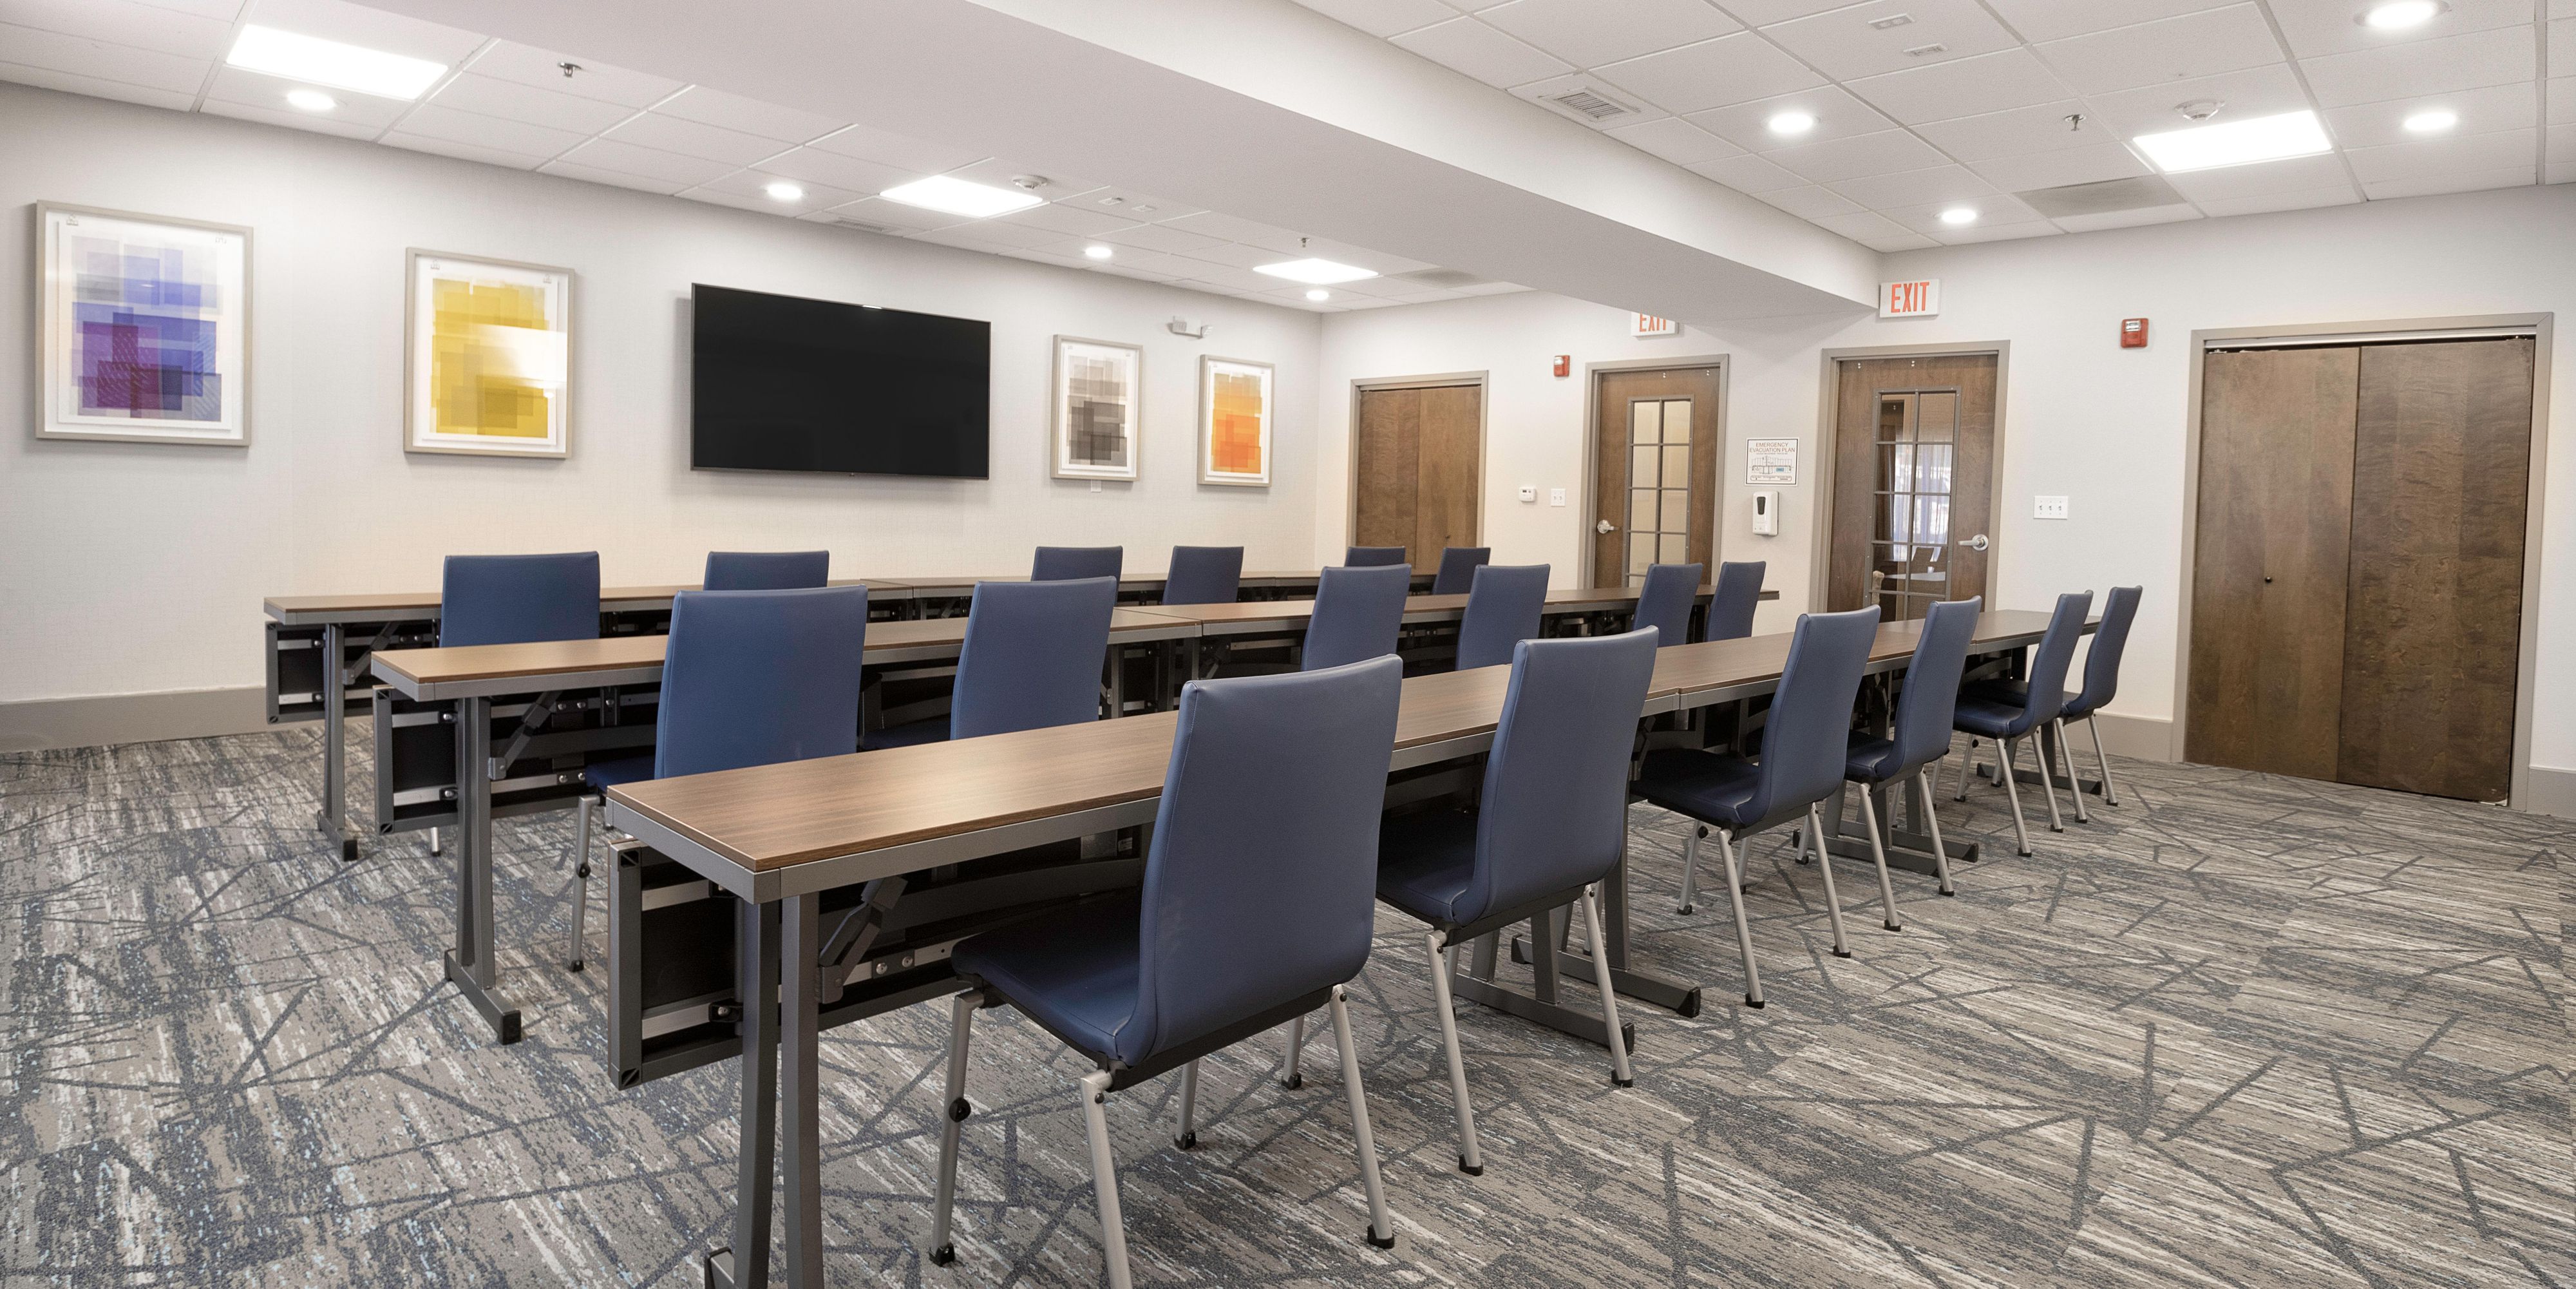 Plan your next successful small meeting in the only hotel meeting room in Festus! Our hotel's helpful staff can assist you with all the details, and our 500-sq-ft meeting room is perfect for a sales presentation or seminar with 25 guests.